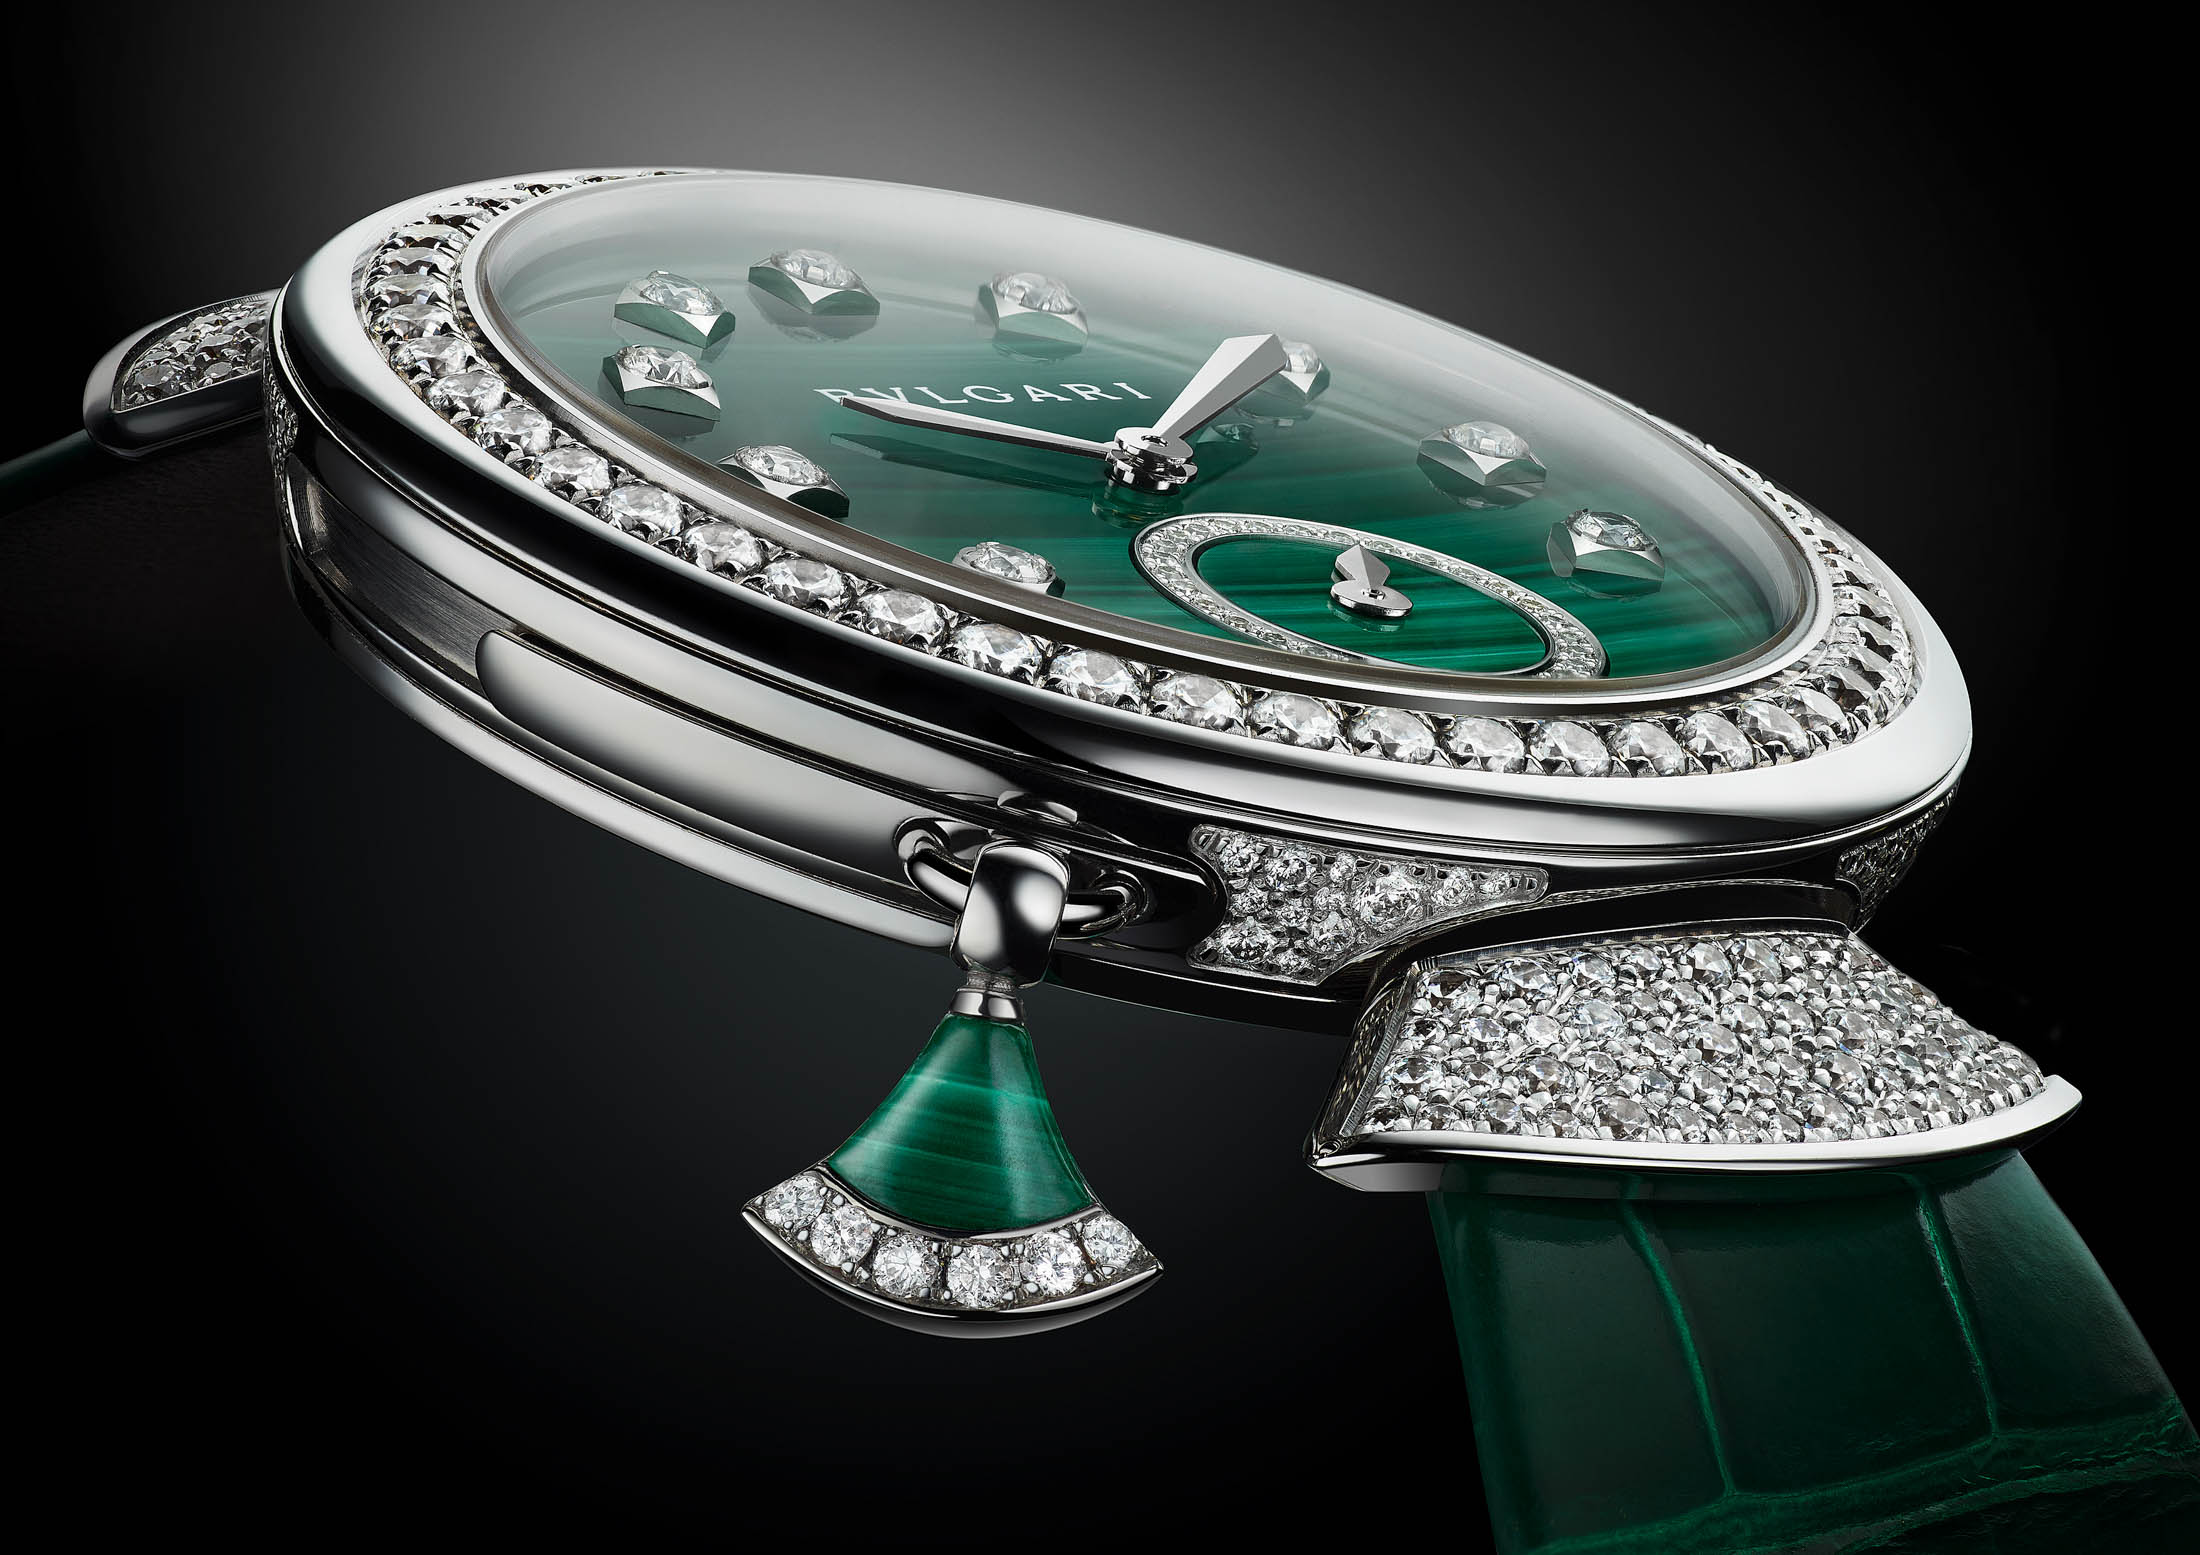 LVMH Watch Brands To Host Their Own, Dubai-Based Watch Show in